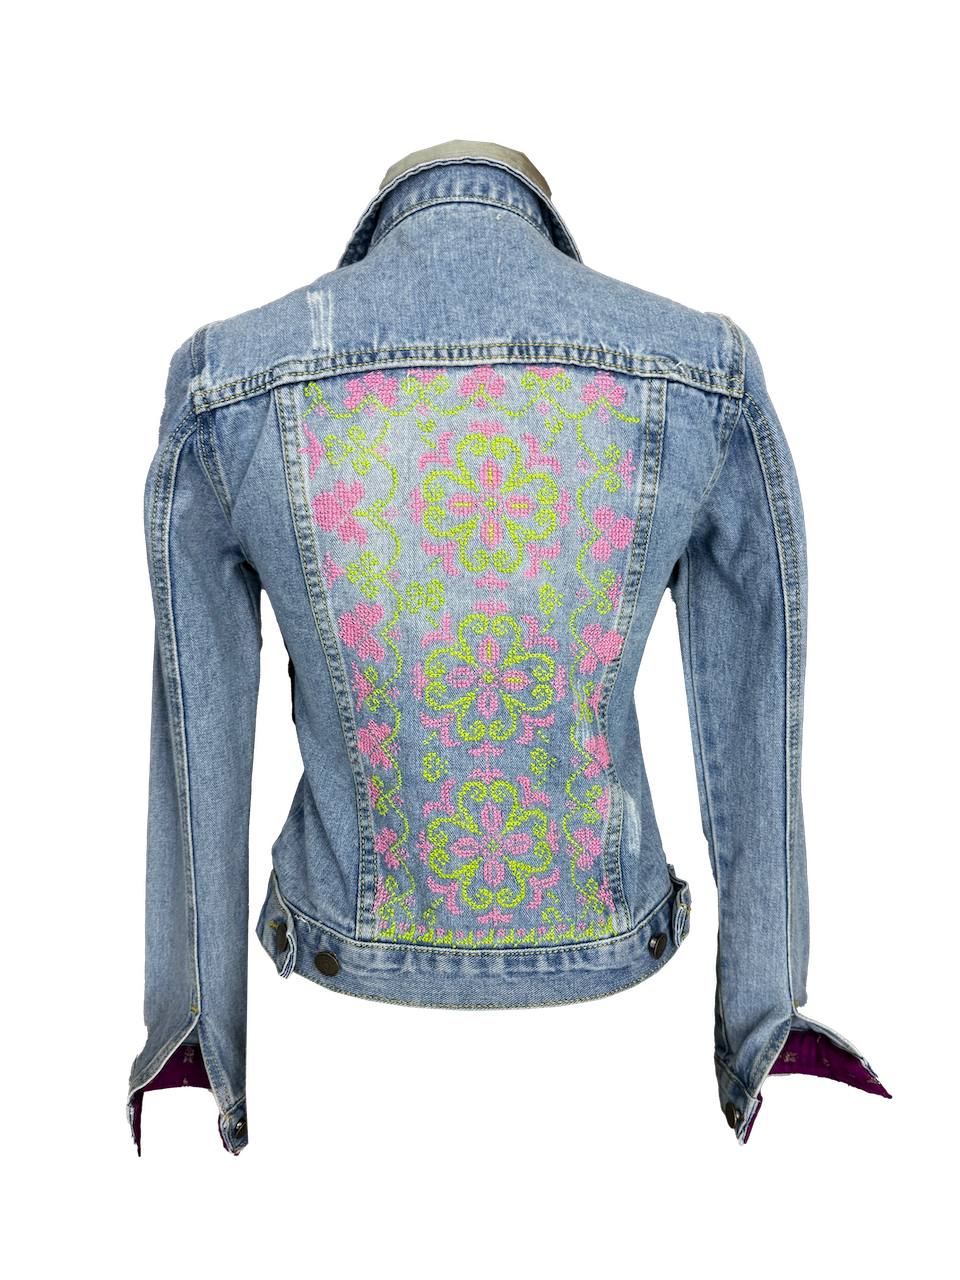 The Embroidered Denim Jacket in Green and Pink